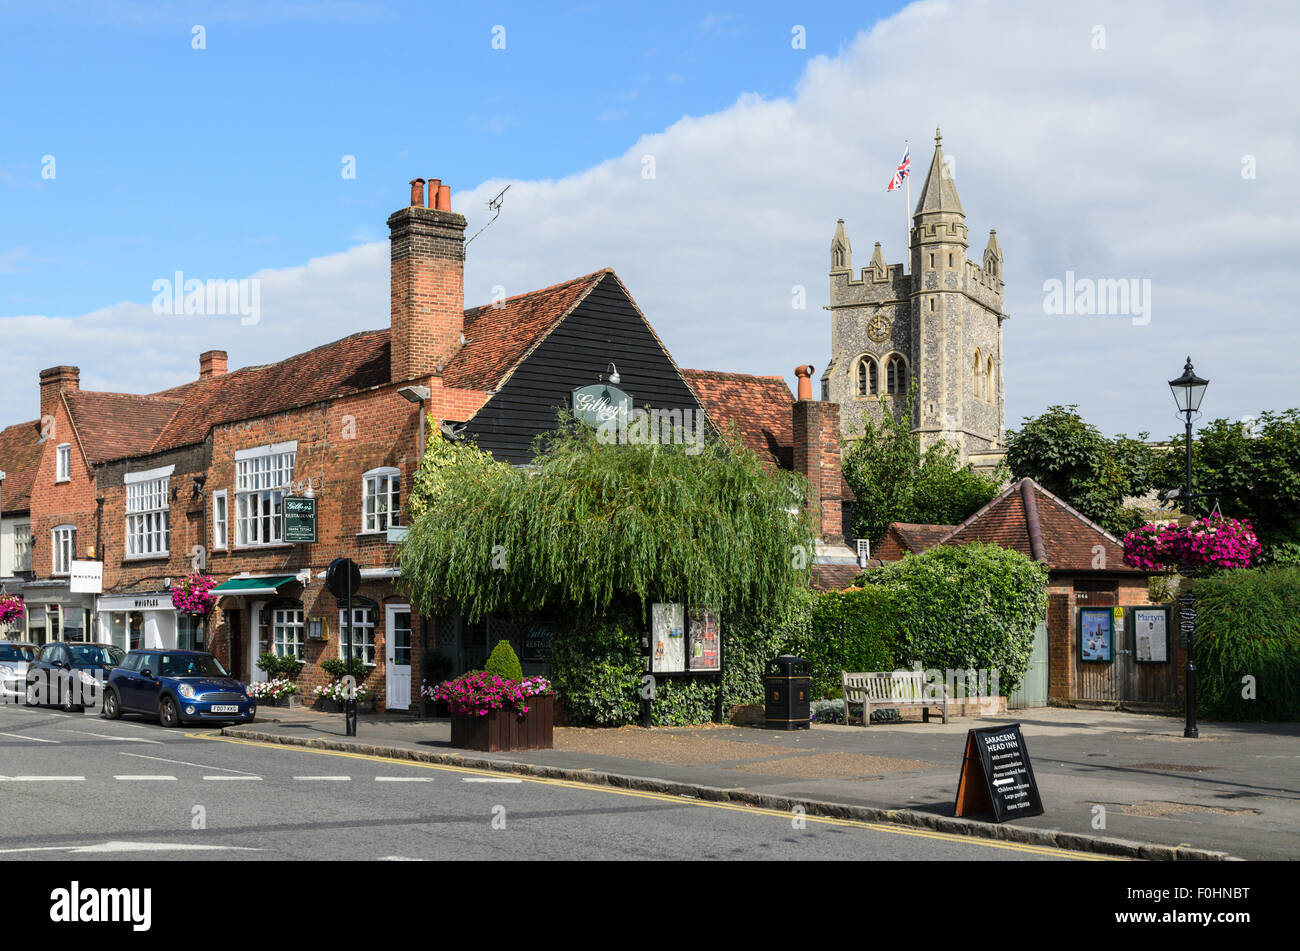 A view of Old Amersham with St Marys Church in the background. Old Amersham, Buckinghamshire, England, UK Stock Photo